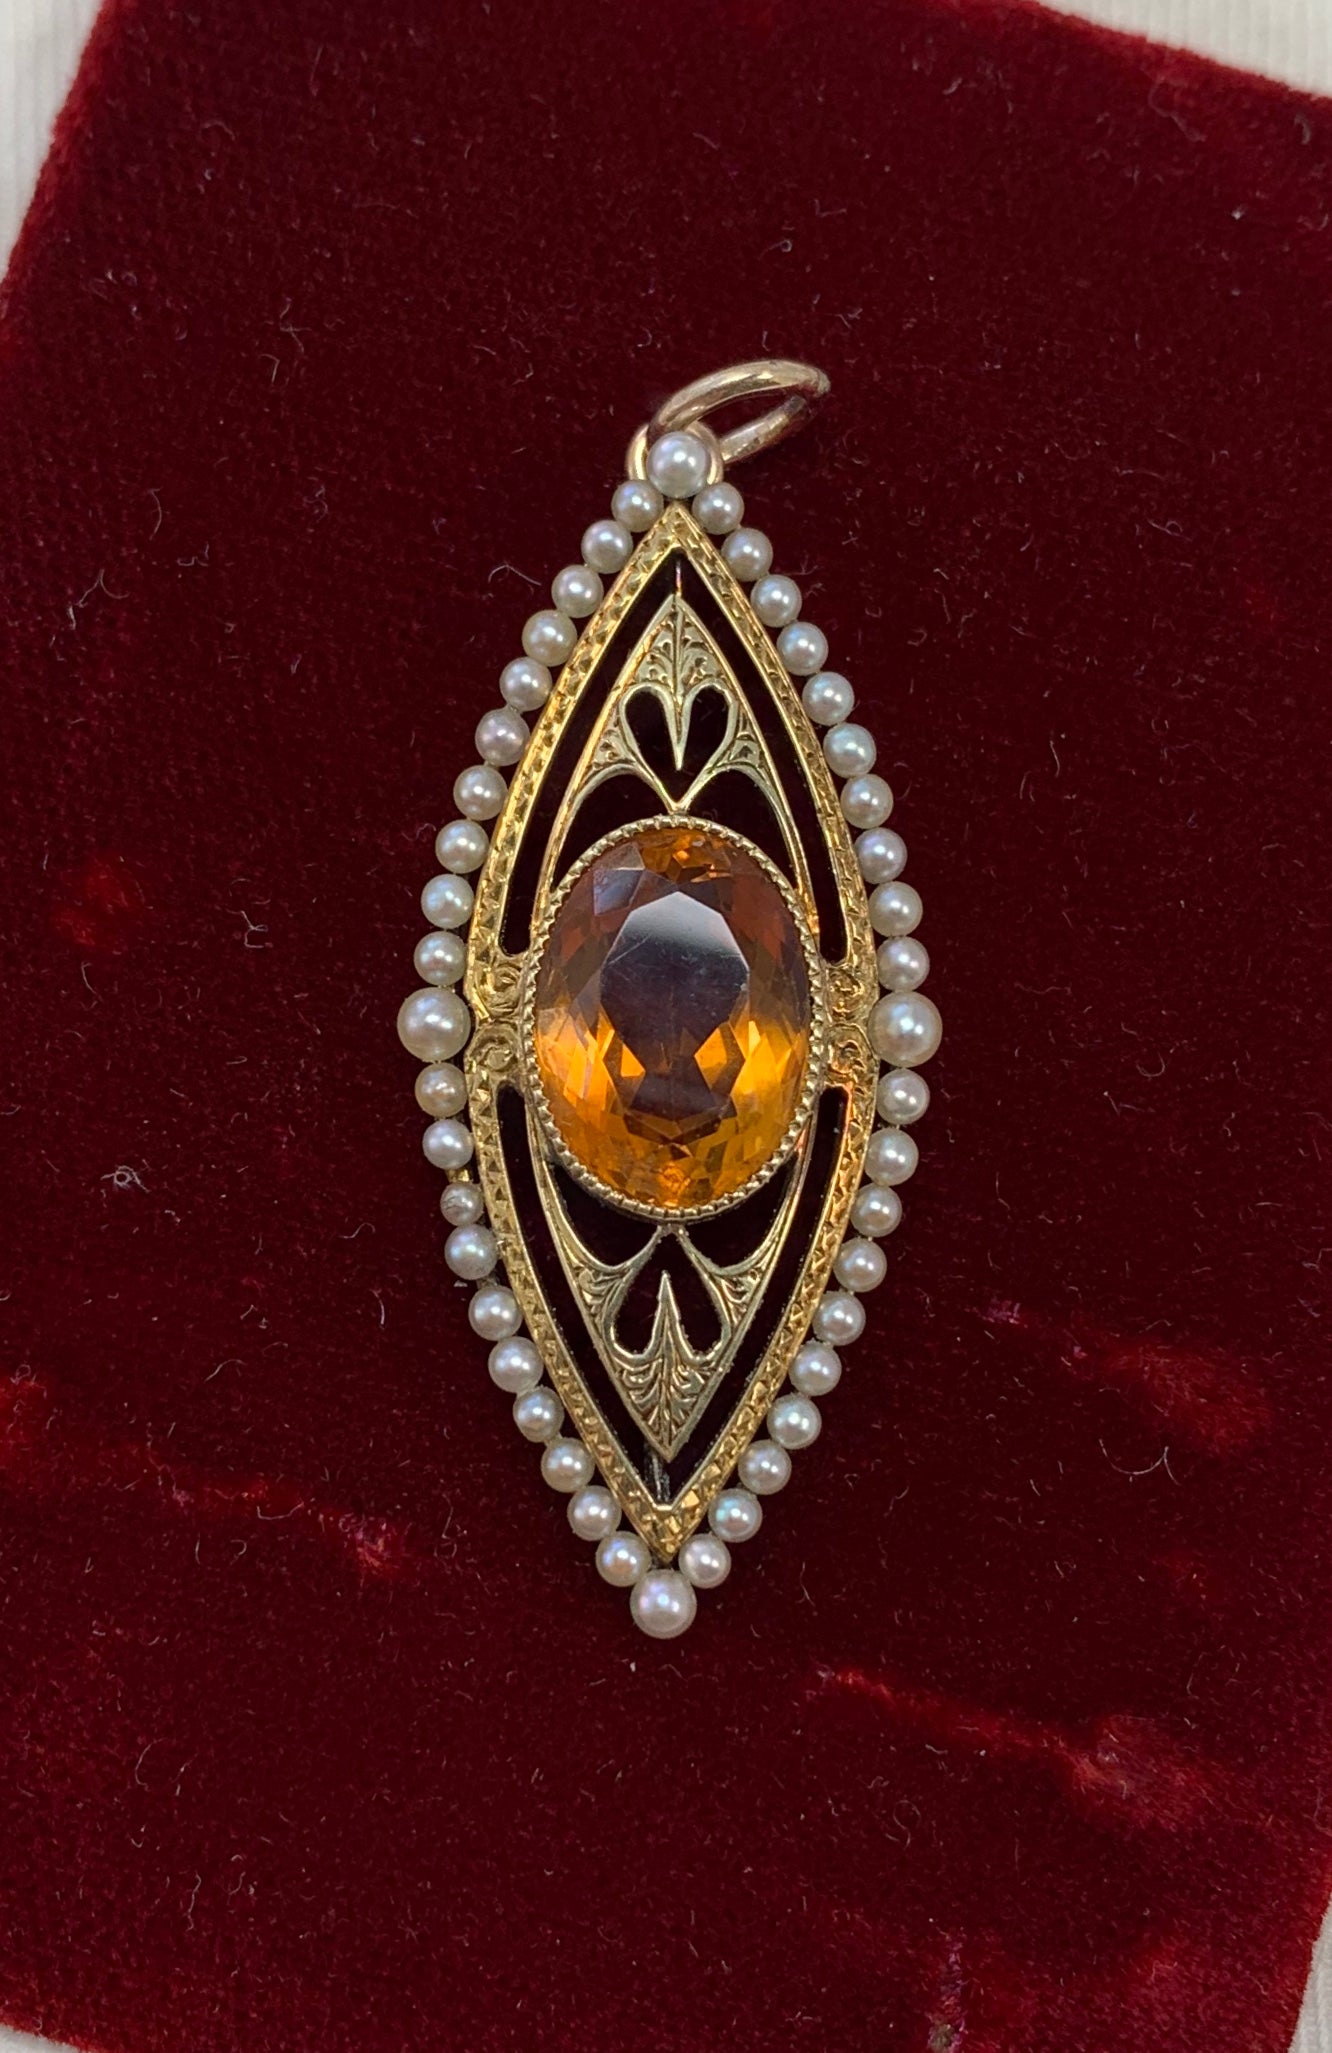 This is a beautiful Victorian - Art Deco Citrine Pearl Pendant in 14 Karat Gold.   The rare pendant is set with a stunning oval faceted Citrine of magnificent orange color.  The citrine is 13mm by 10mm by 7mm and is approximately 5 Carats.   The